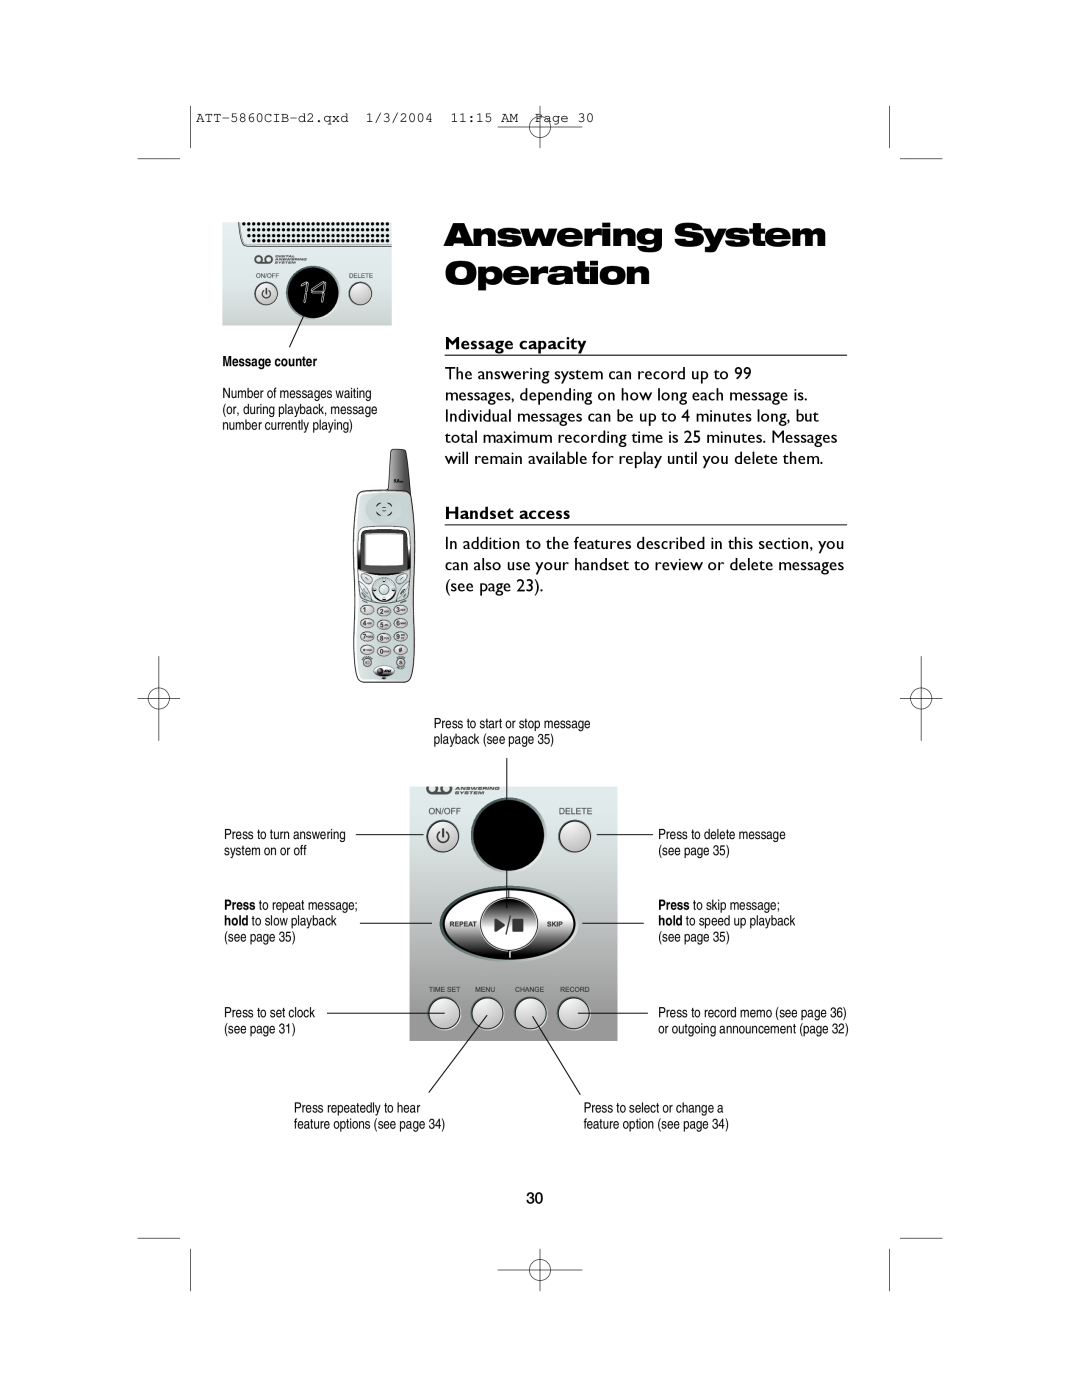 AT&T E5860 user manual Answering System Operation, Message capacity, Handset access 